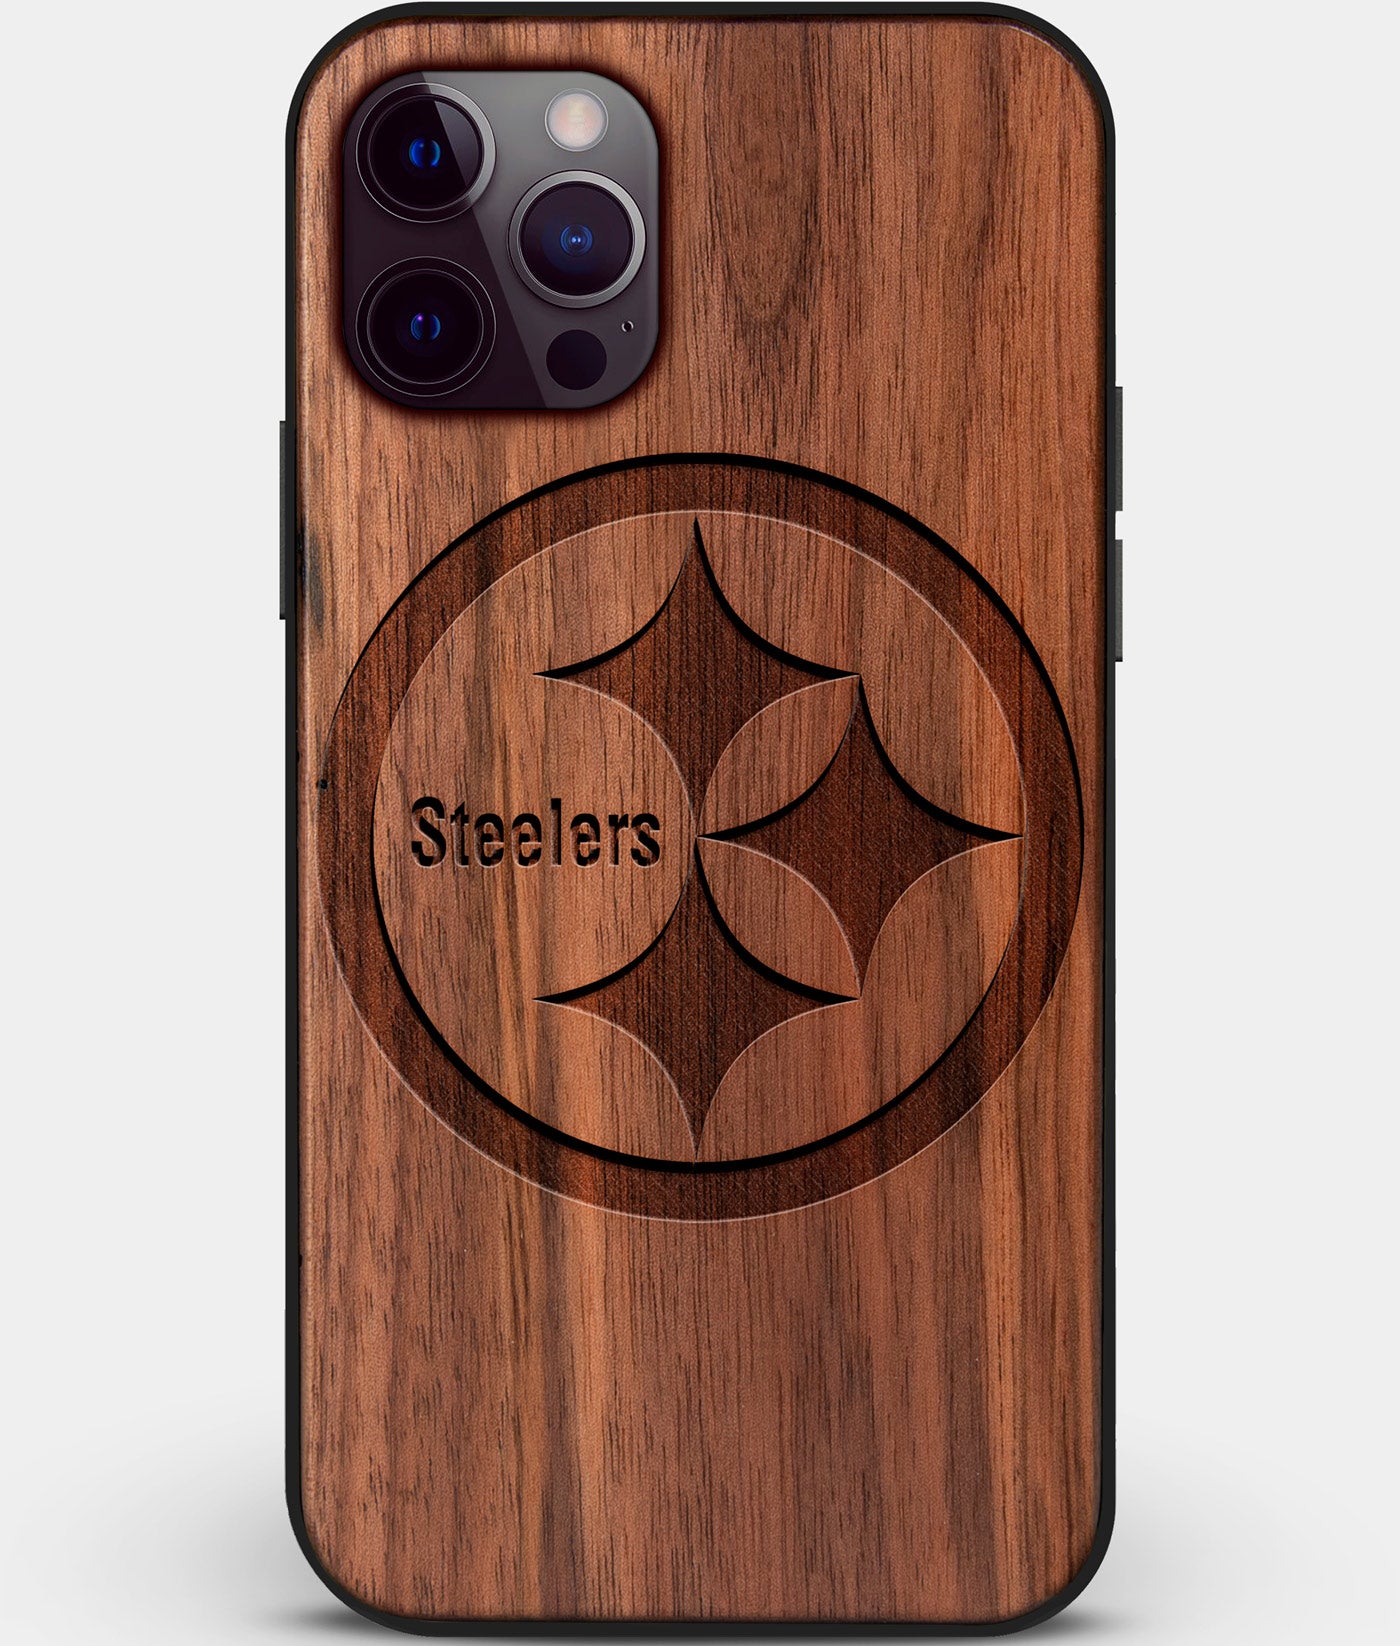 pittsburgh steelers gifts for him